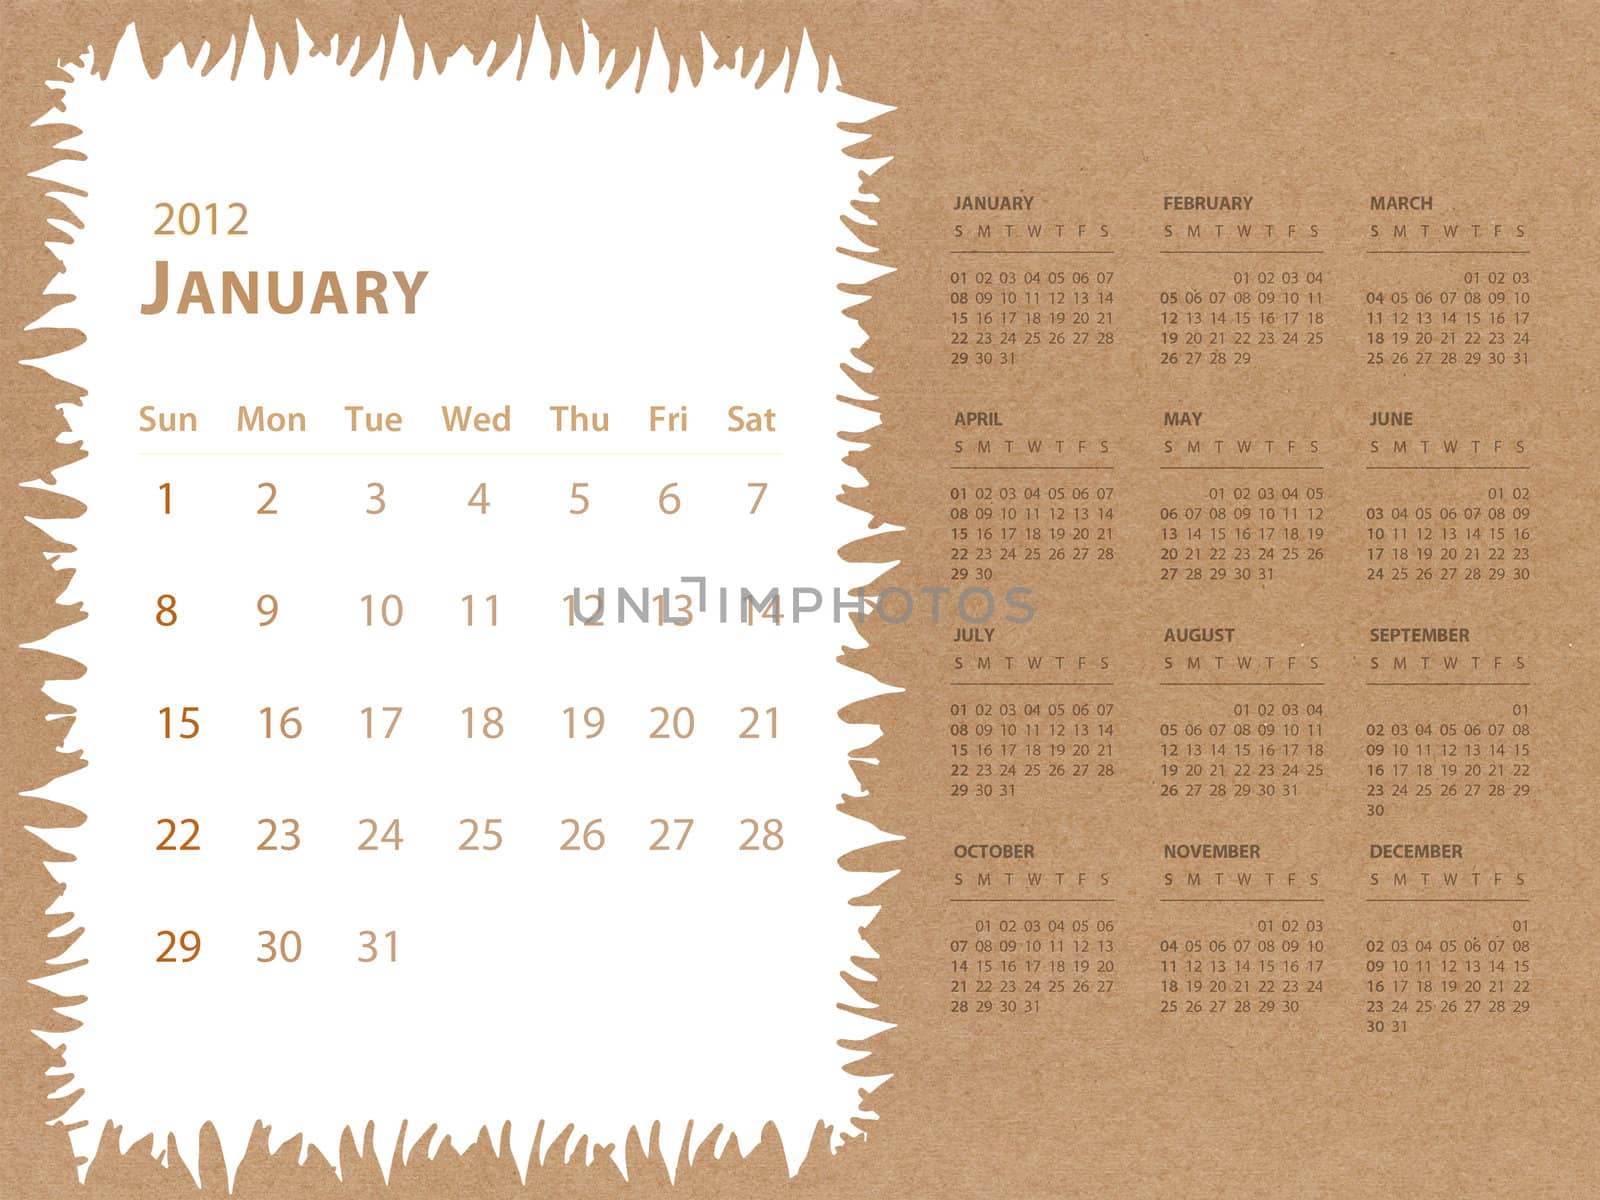 January of 2012 calendar with recycle paper background by jakgree